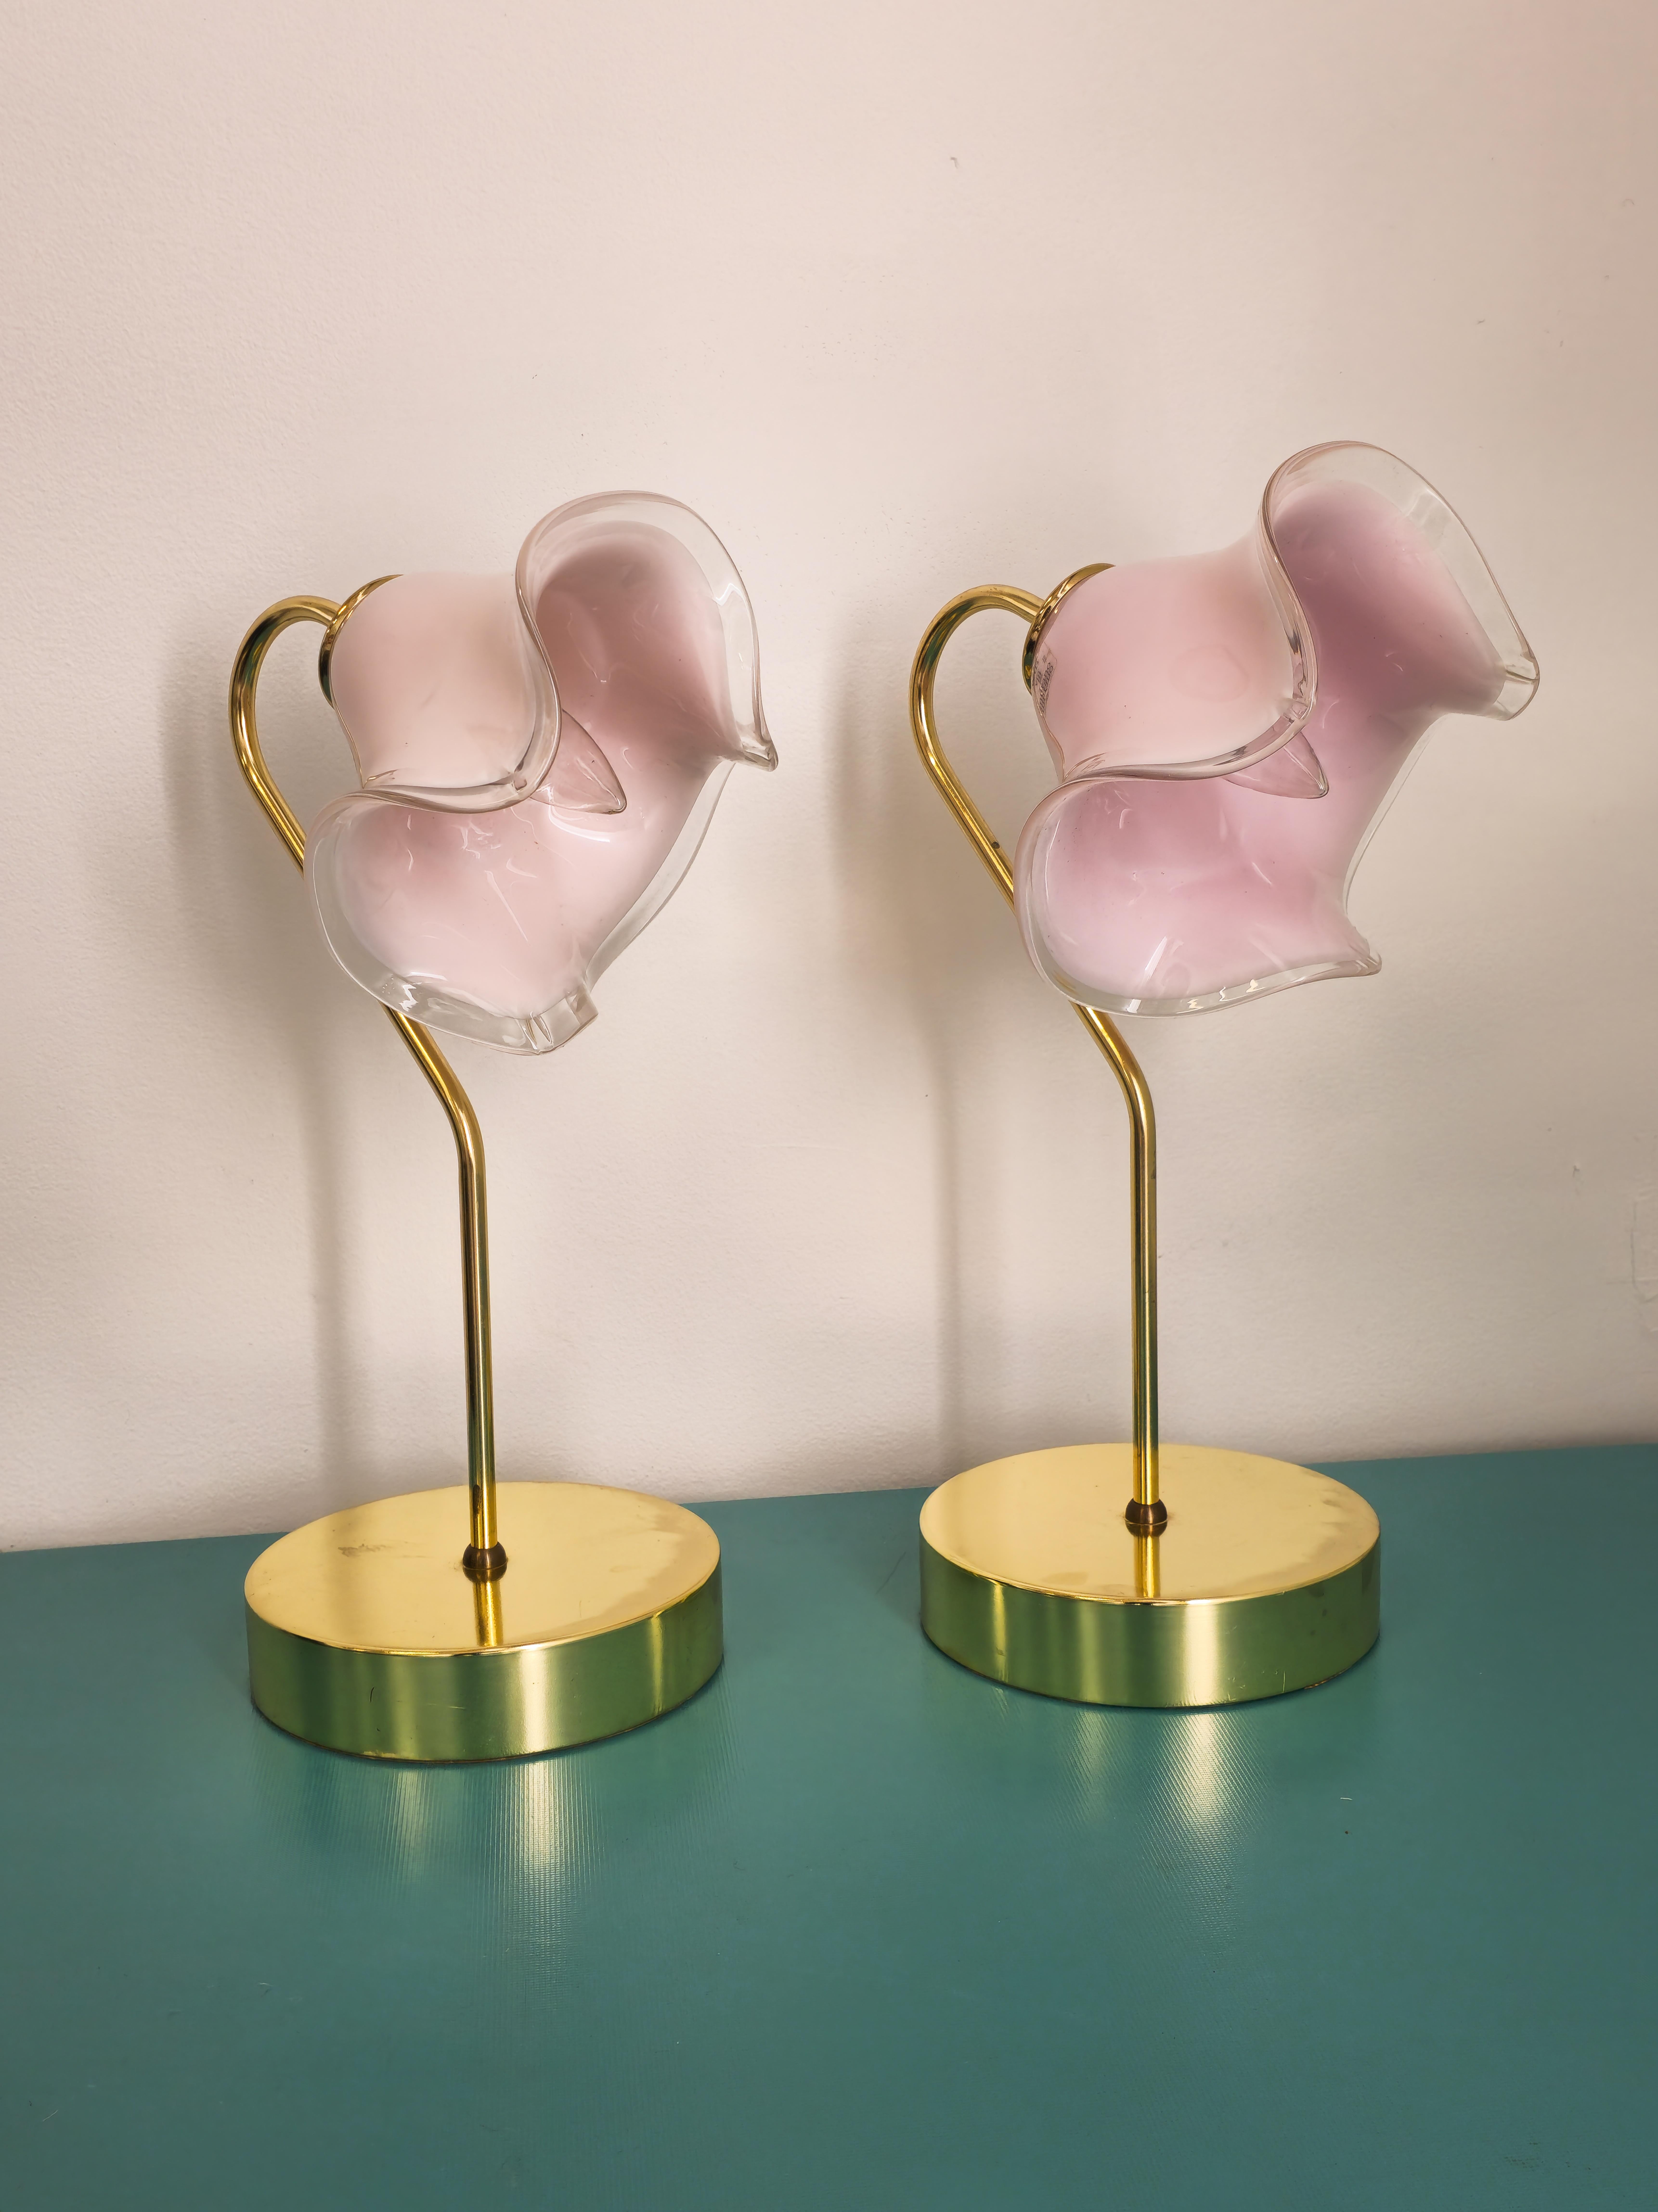 Stunning pair of pink murano art glass and brass table lamps. The beautiful art glass is made pink murano art glass. The shape of the glass shade resembles a floral form. The body of the lamps are brass. It's brass body is curved at the top where it